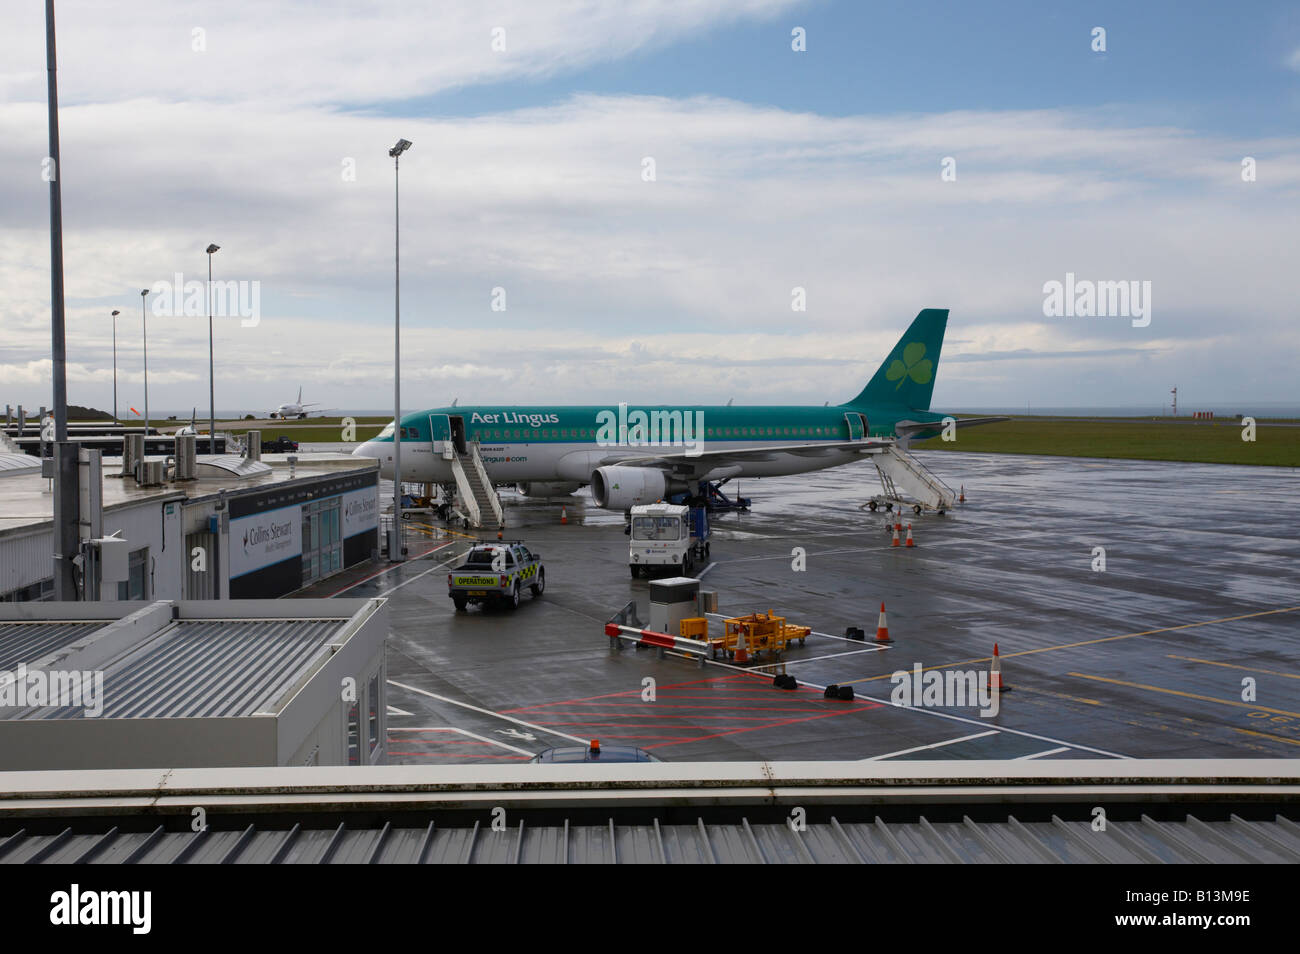 dublin to jersey aer lingus